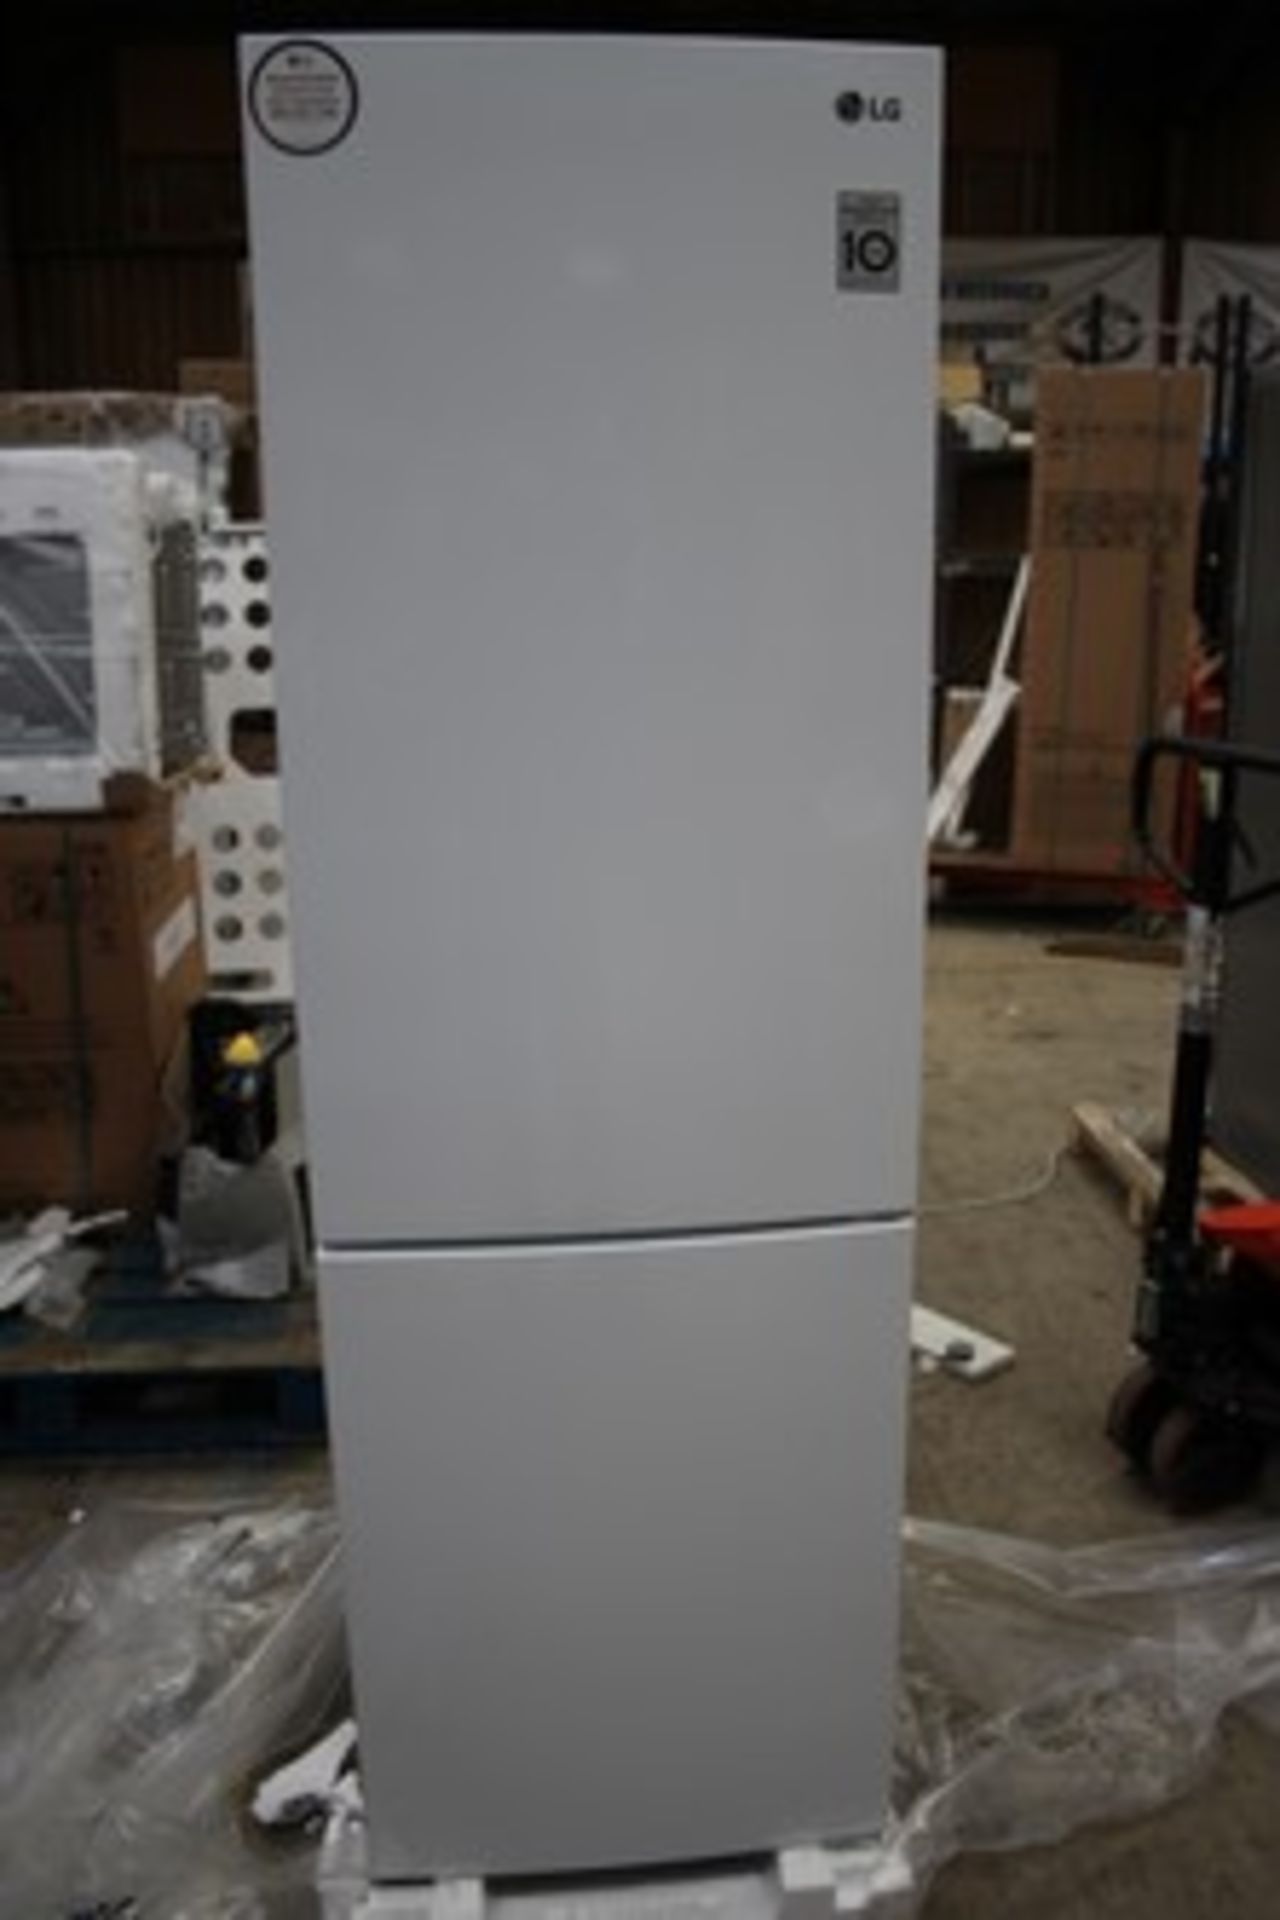 1 x LG Freestanding fridge freezer - white model: GBB61SWJEC Grade B, small dents and scratches on